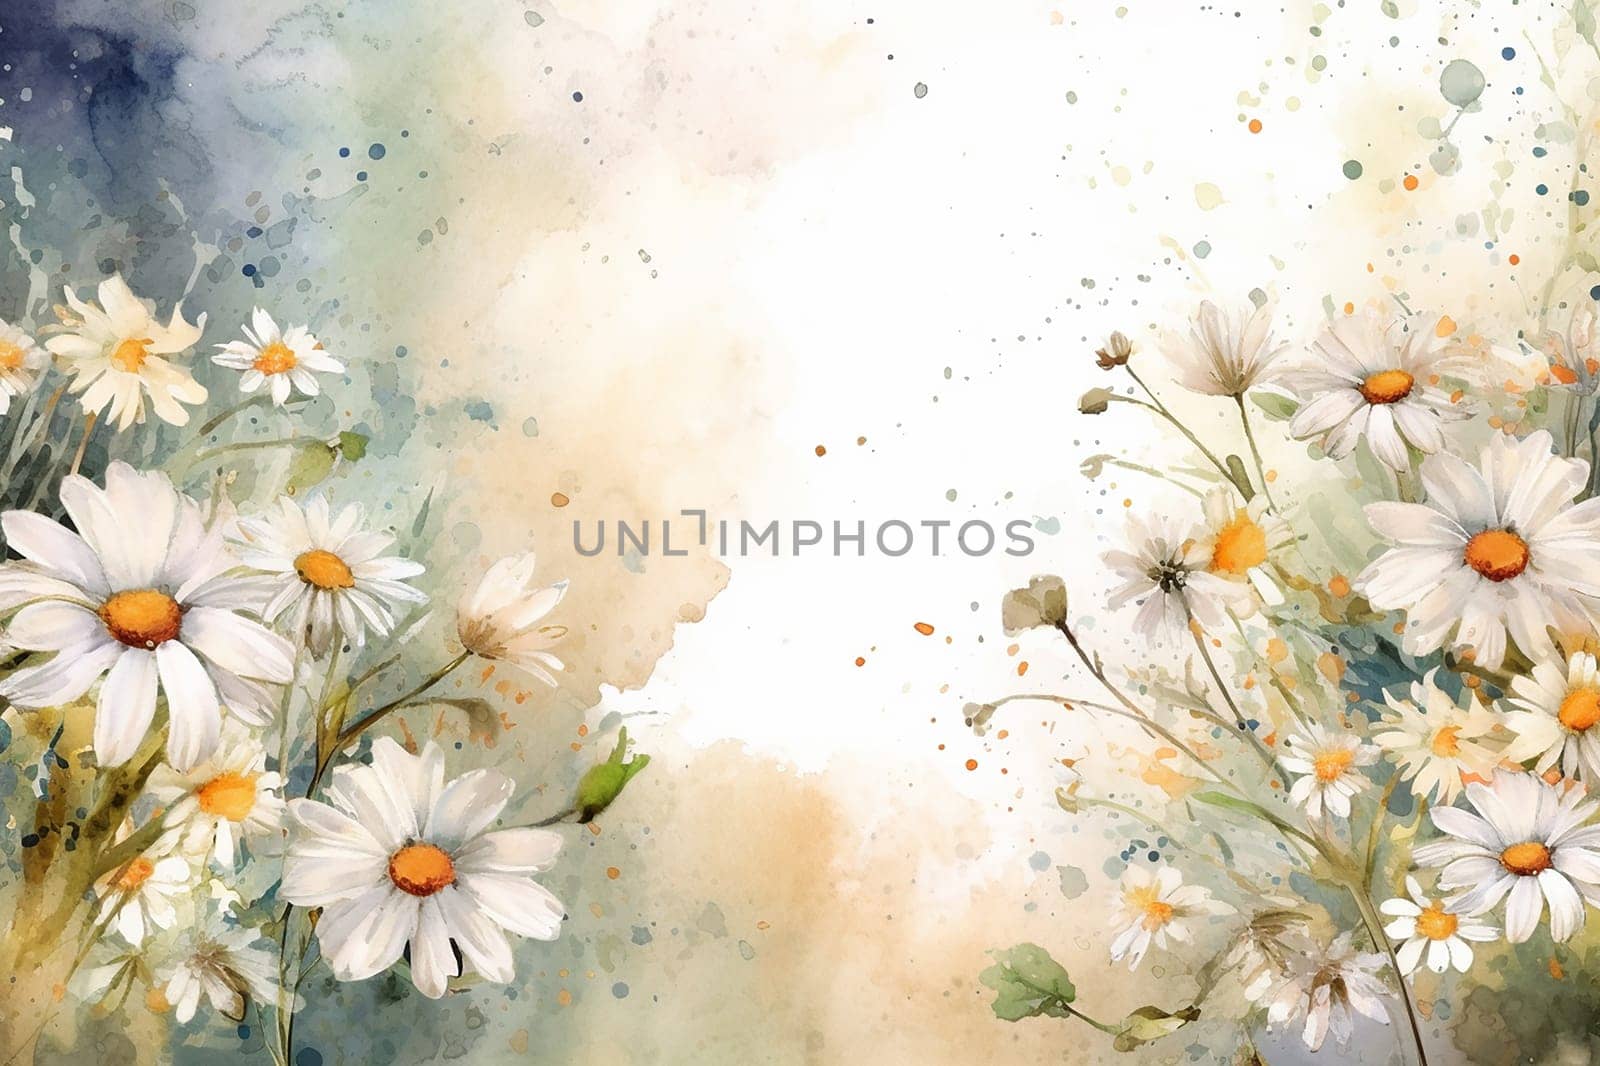 Watercolor painting of white daisies with a splatter effect on watercolor background. by Hype2art